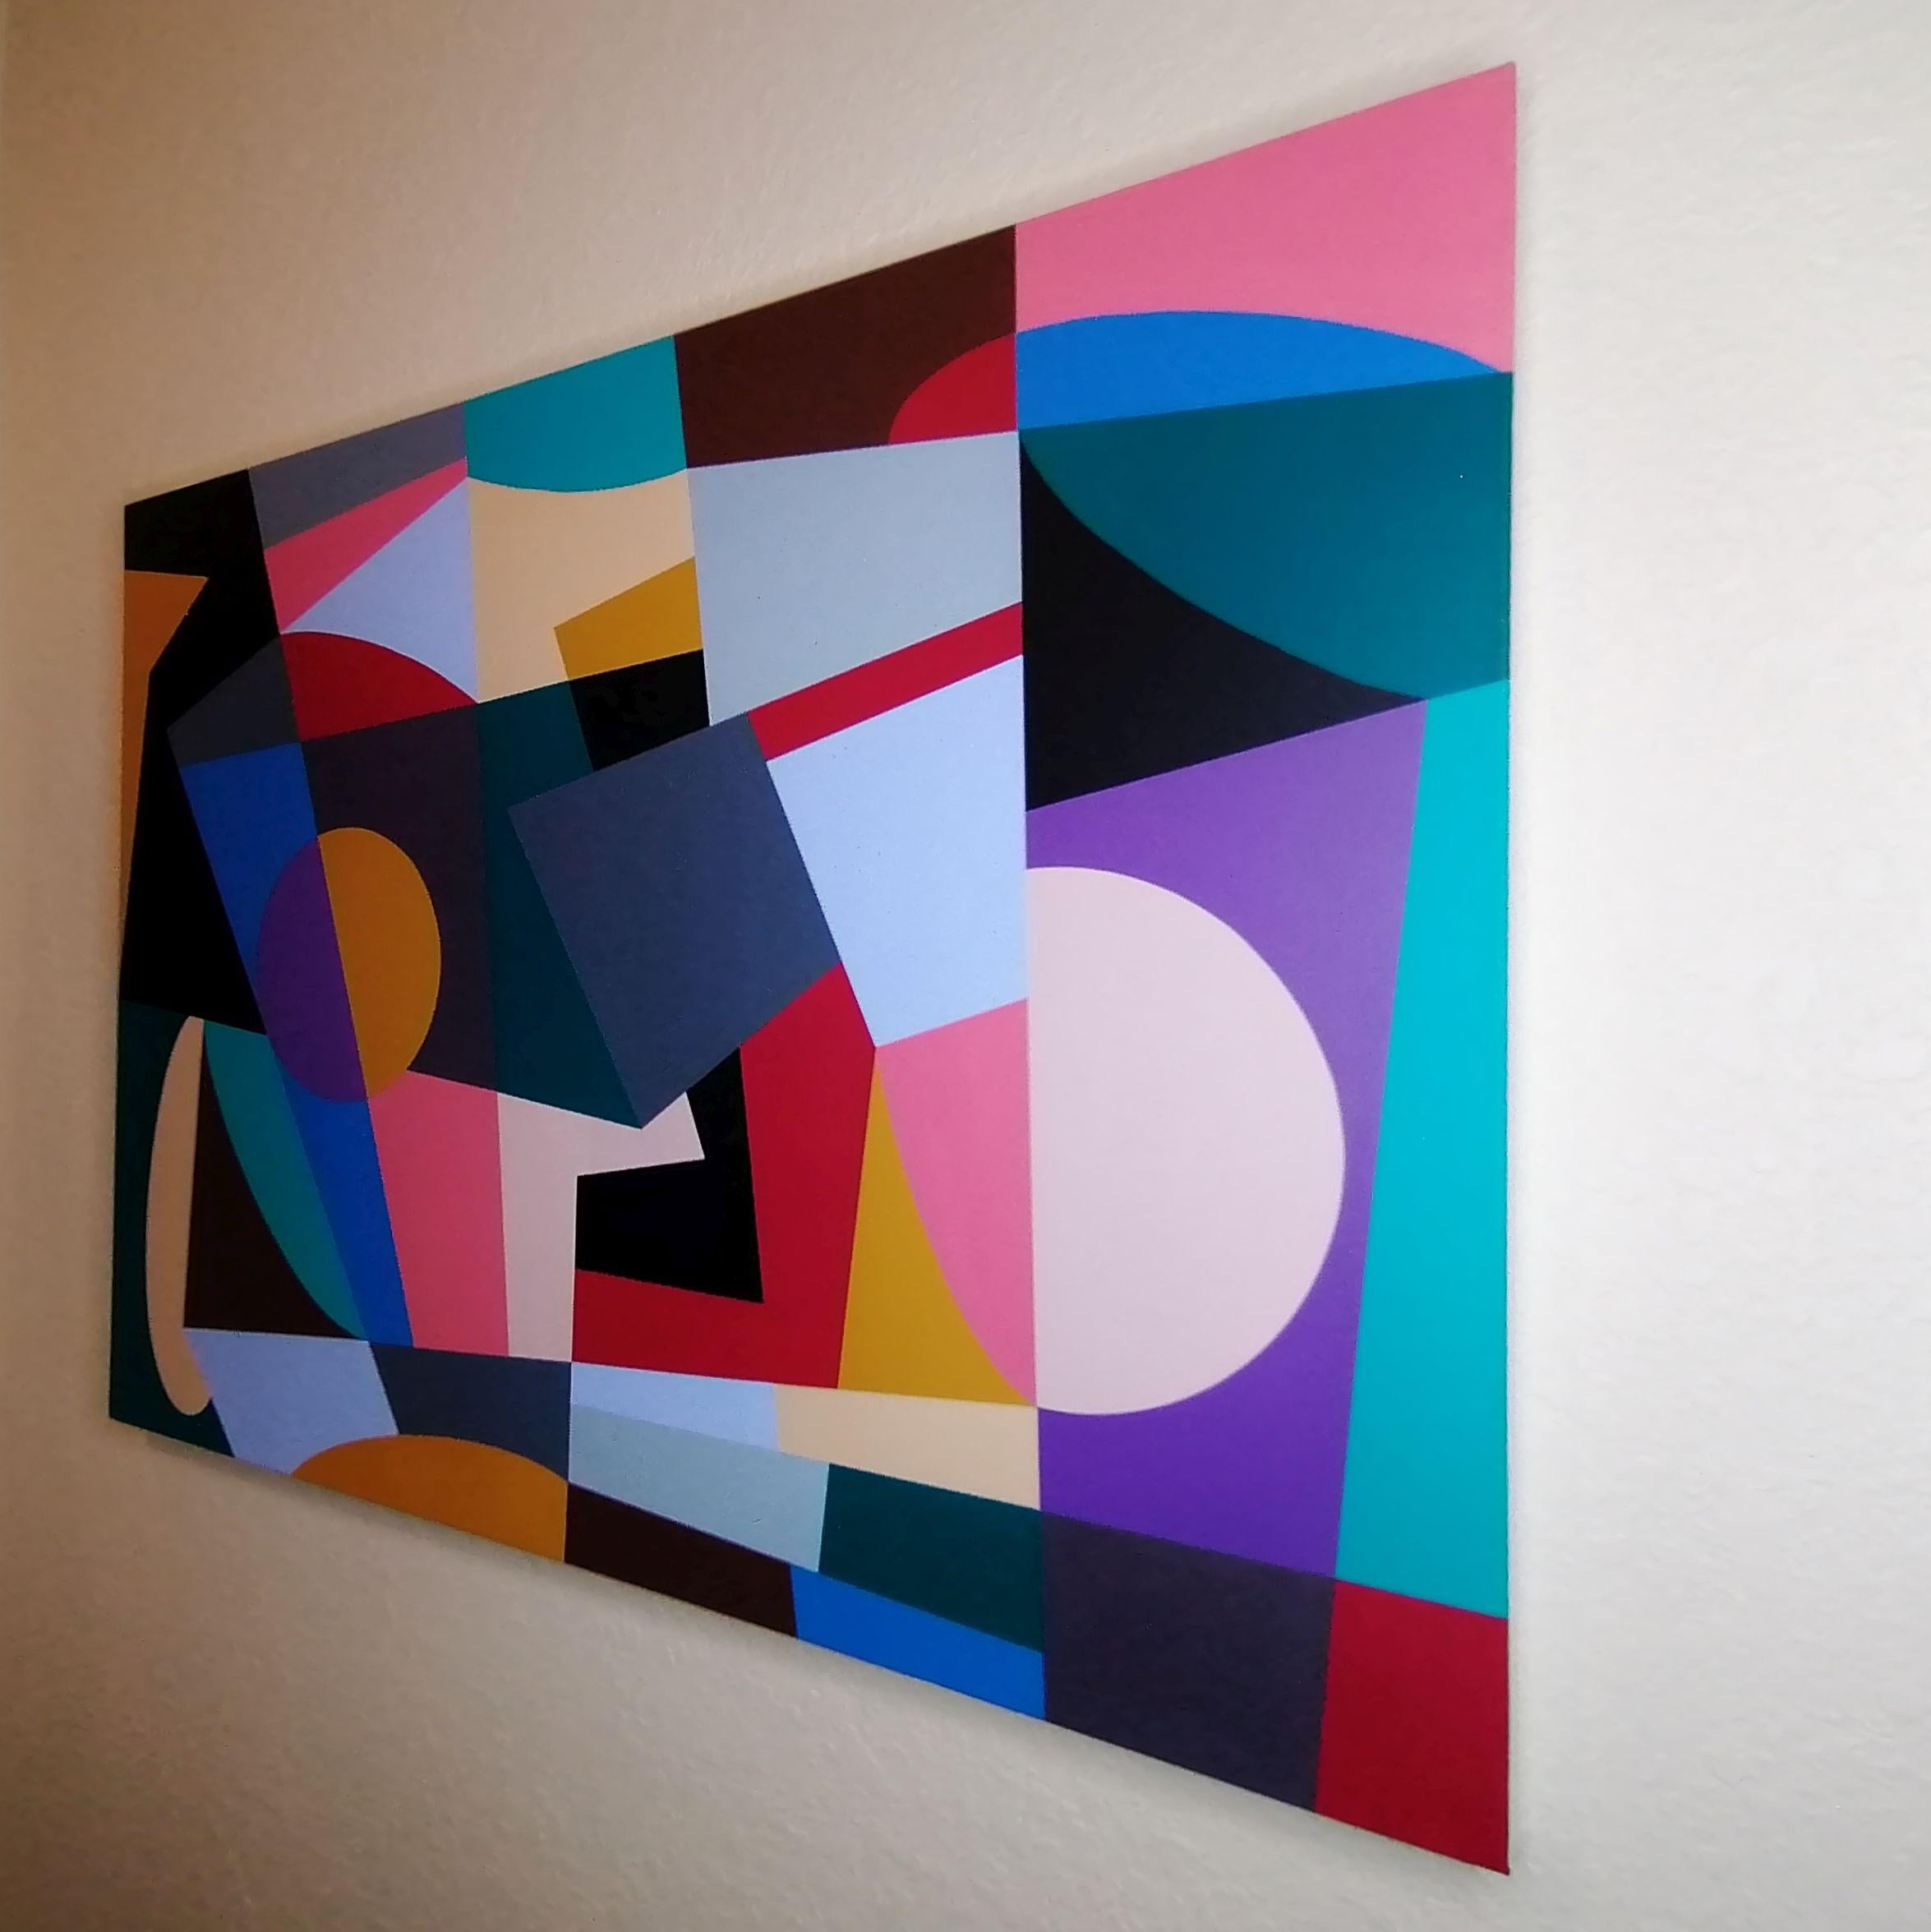 Using the motifs of modern abstract art, I employed hard-edged, minimal, geometric shapes, triangles, circles, and cubist inspired forms. I attempted to create a dynamic composition with contrasting colors including black, red, dark green, magenta,